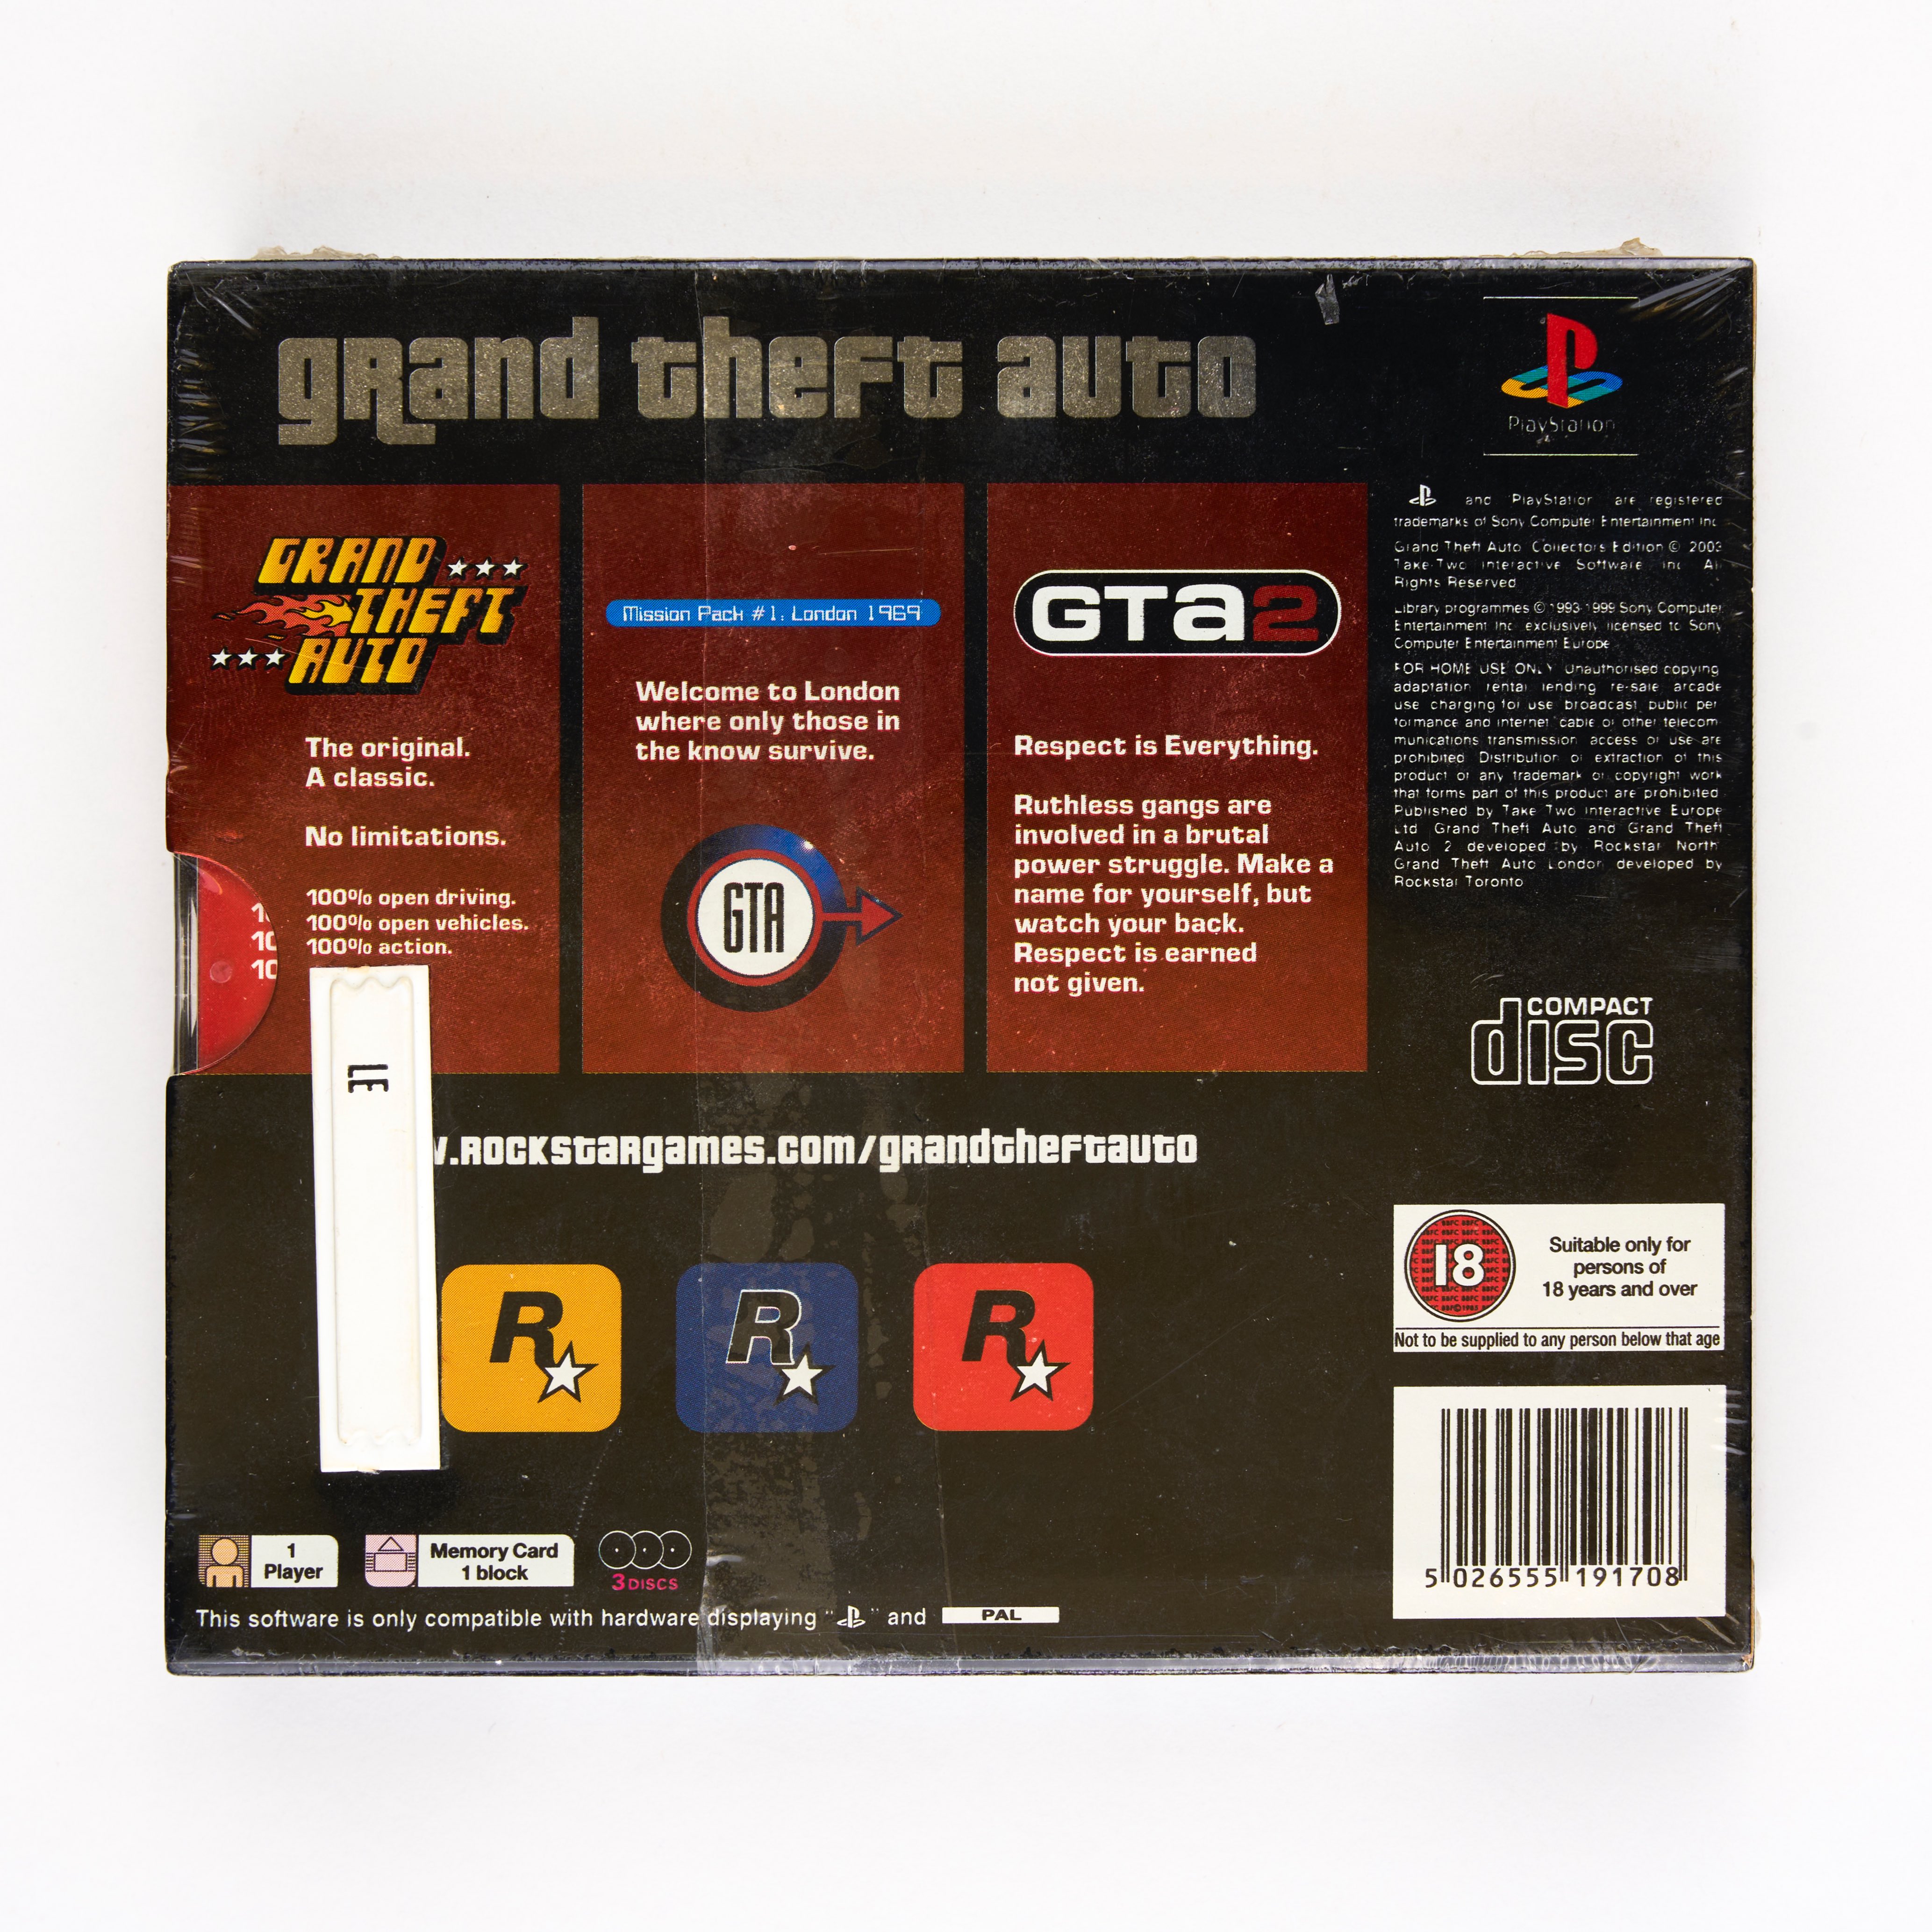 Sony - Grand Theft Auto Collectors' Edition PAL - Playstation - Sealed - Image 2 of 2